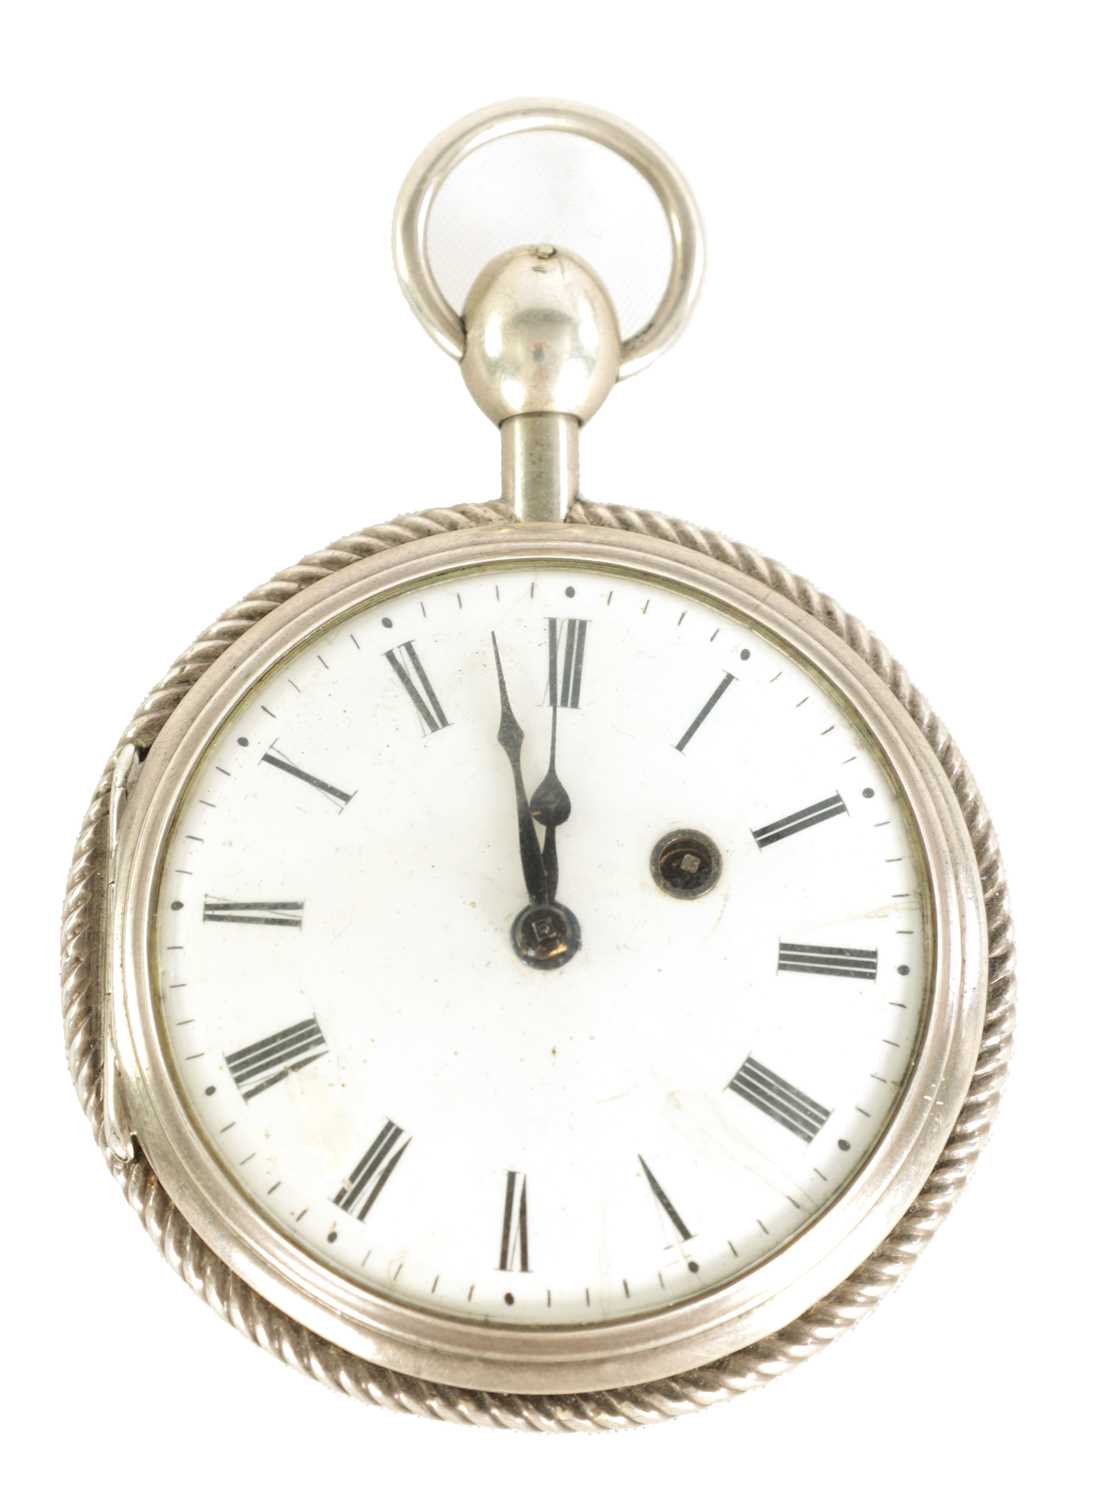 Lot 269 - A 19TH CENTURY FRENCH SILVER CASED REPEATING POCKET WATCH BY VAUCHER